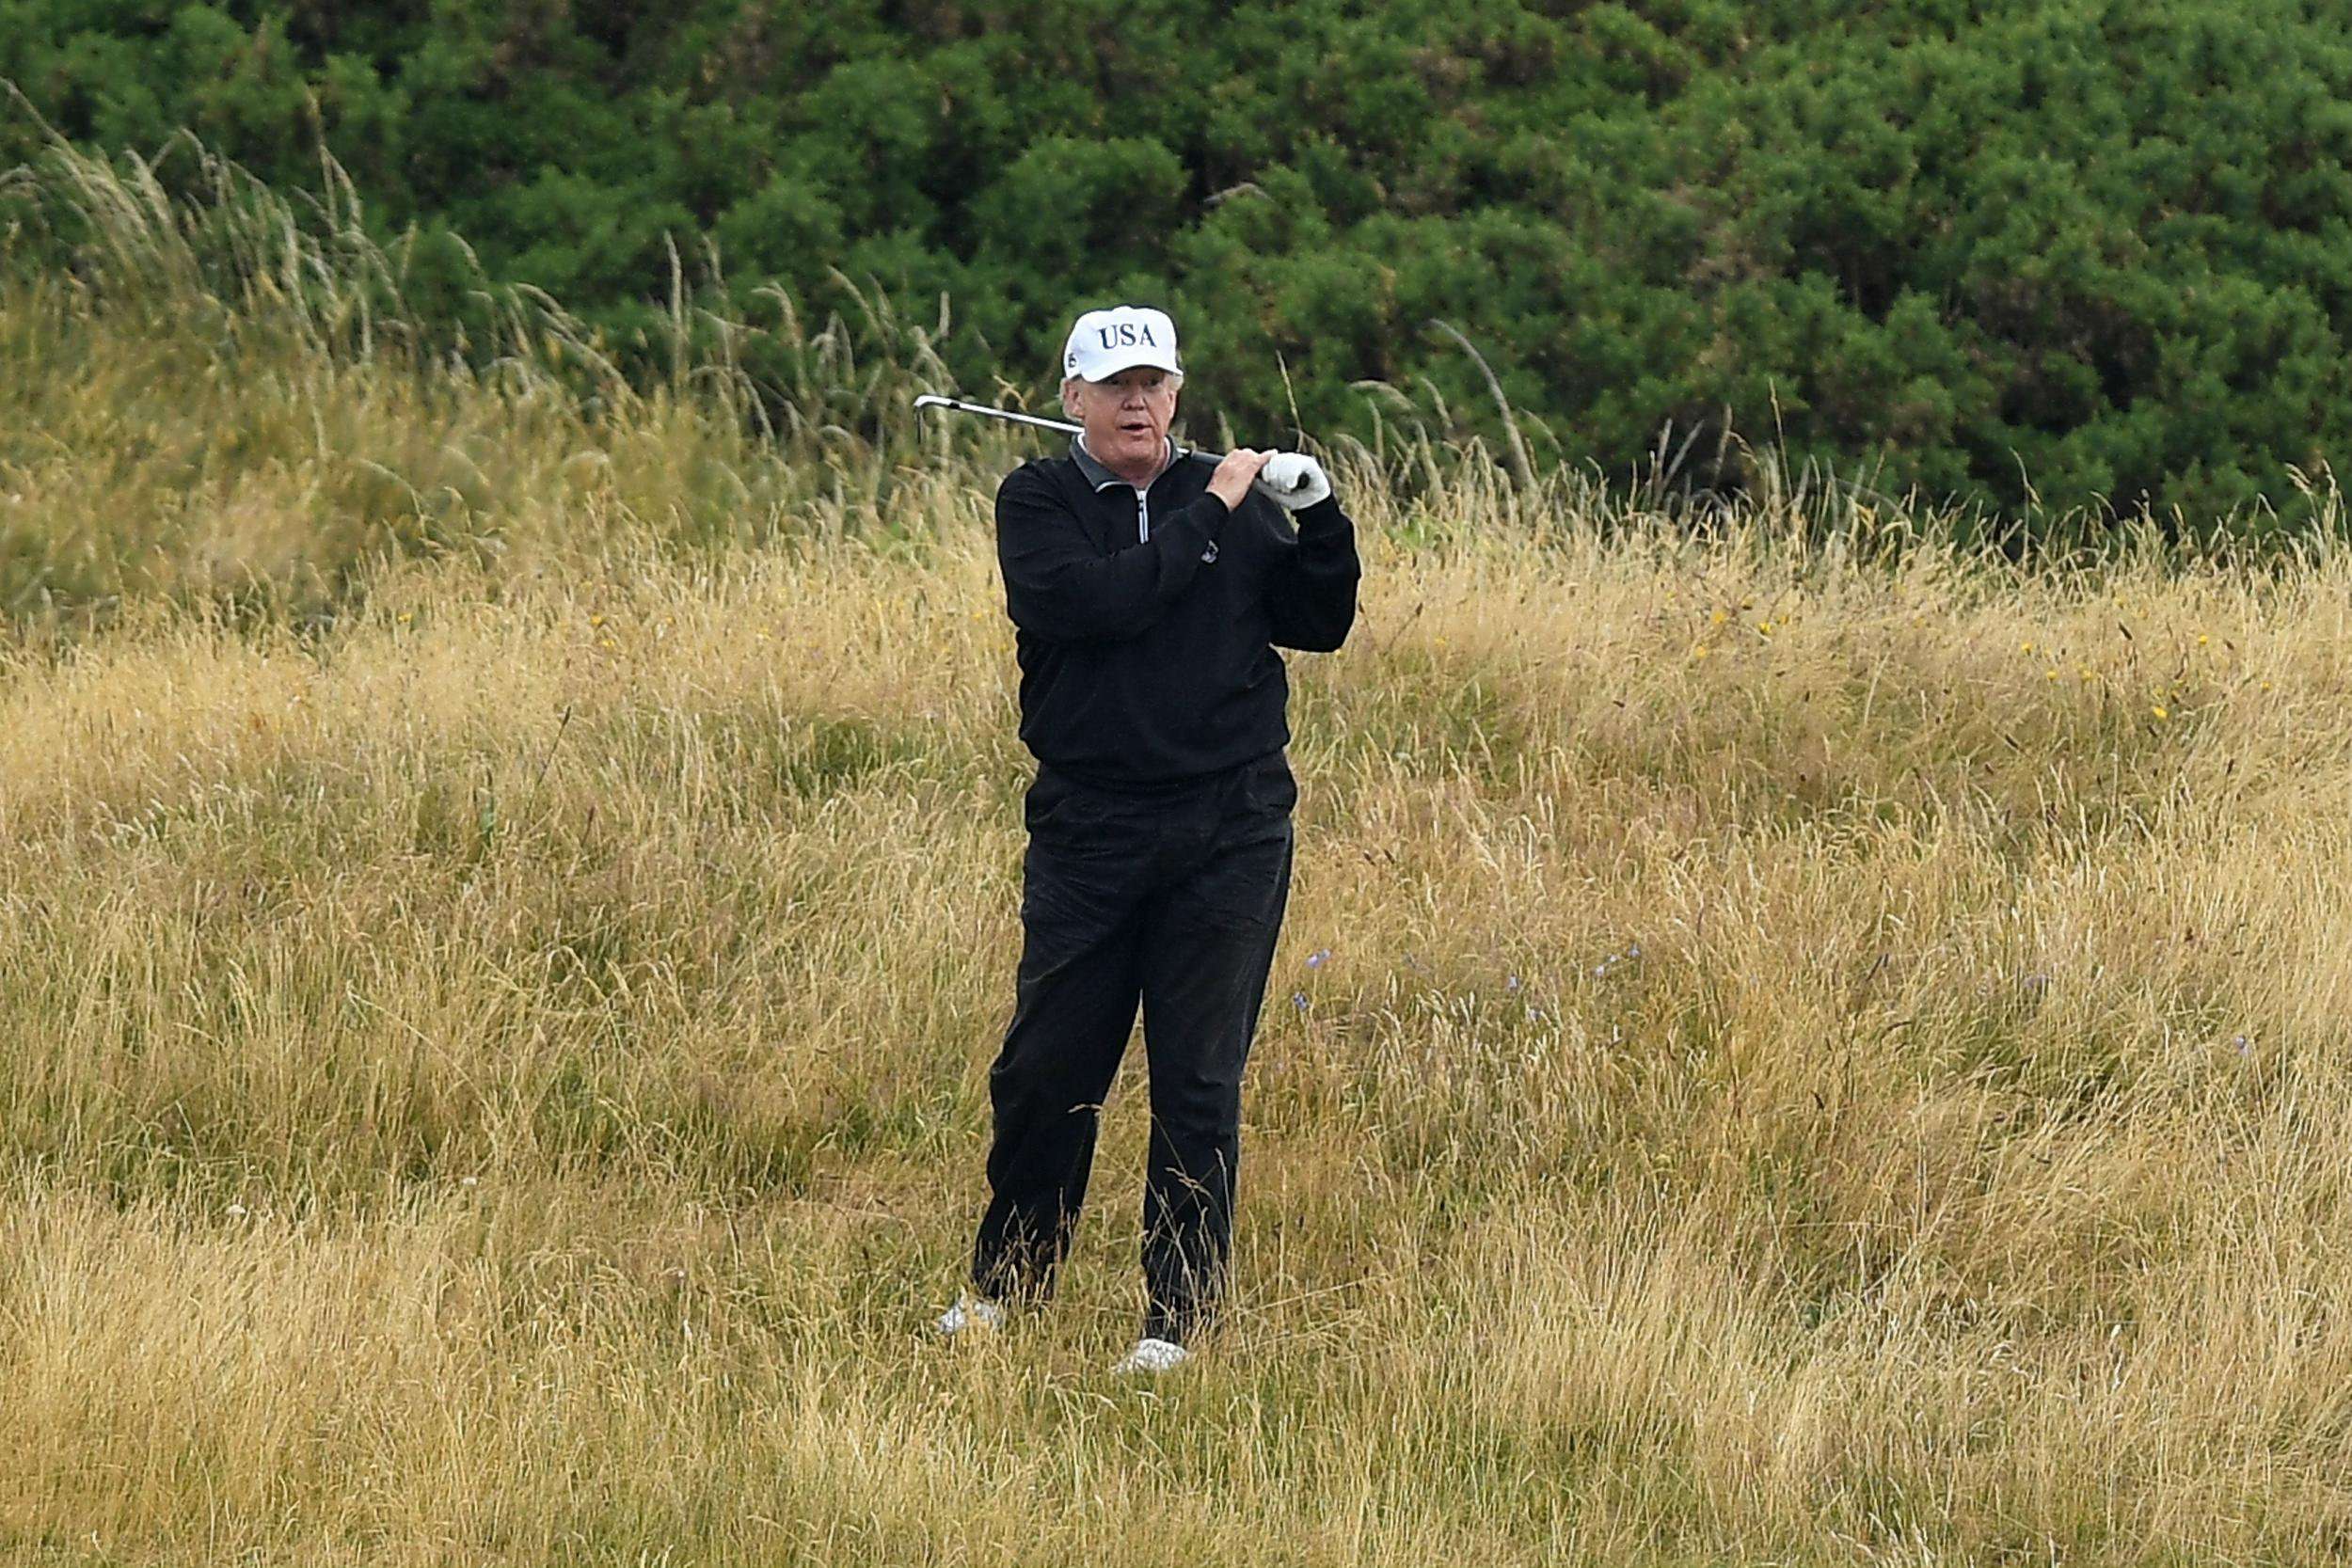 image for Trump attacked for spending '1 in every 5 days' at a golf club in 2019